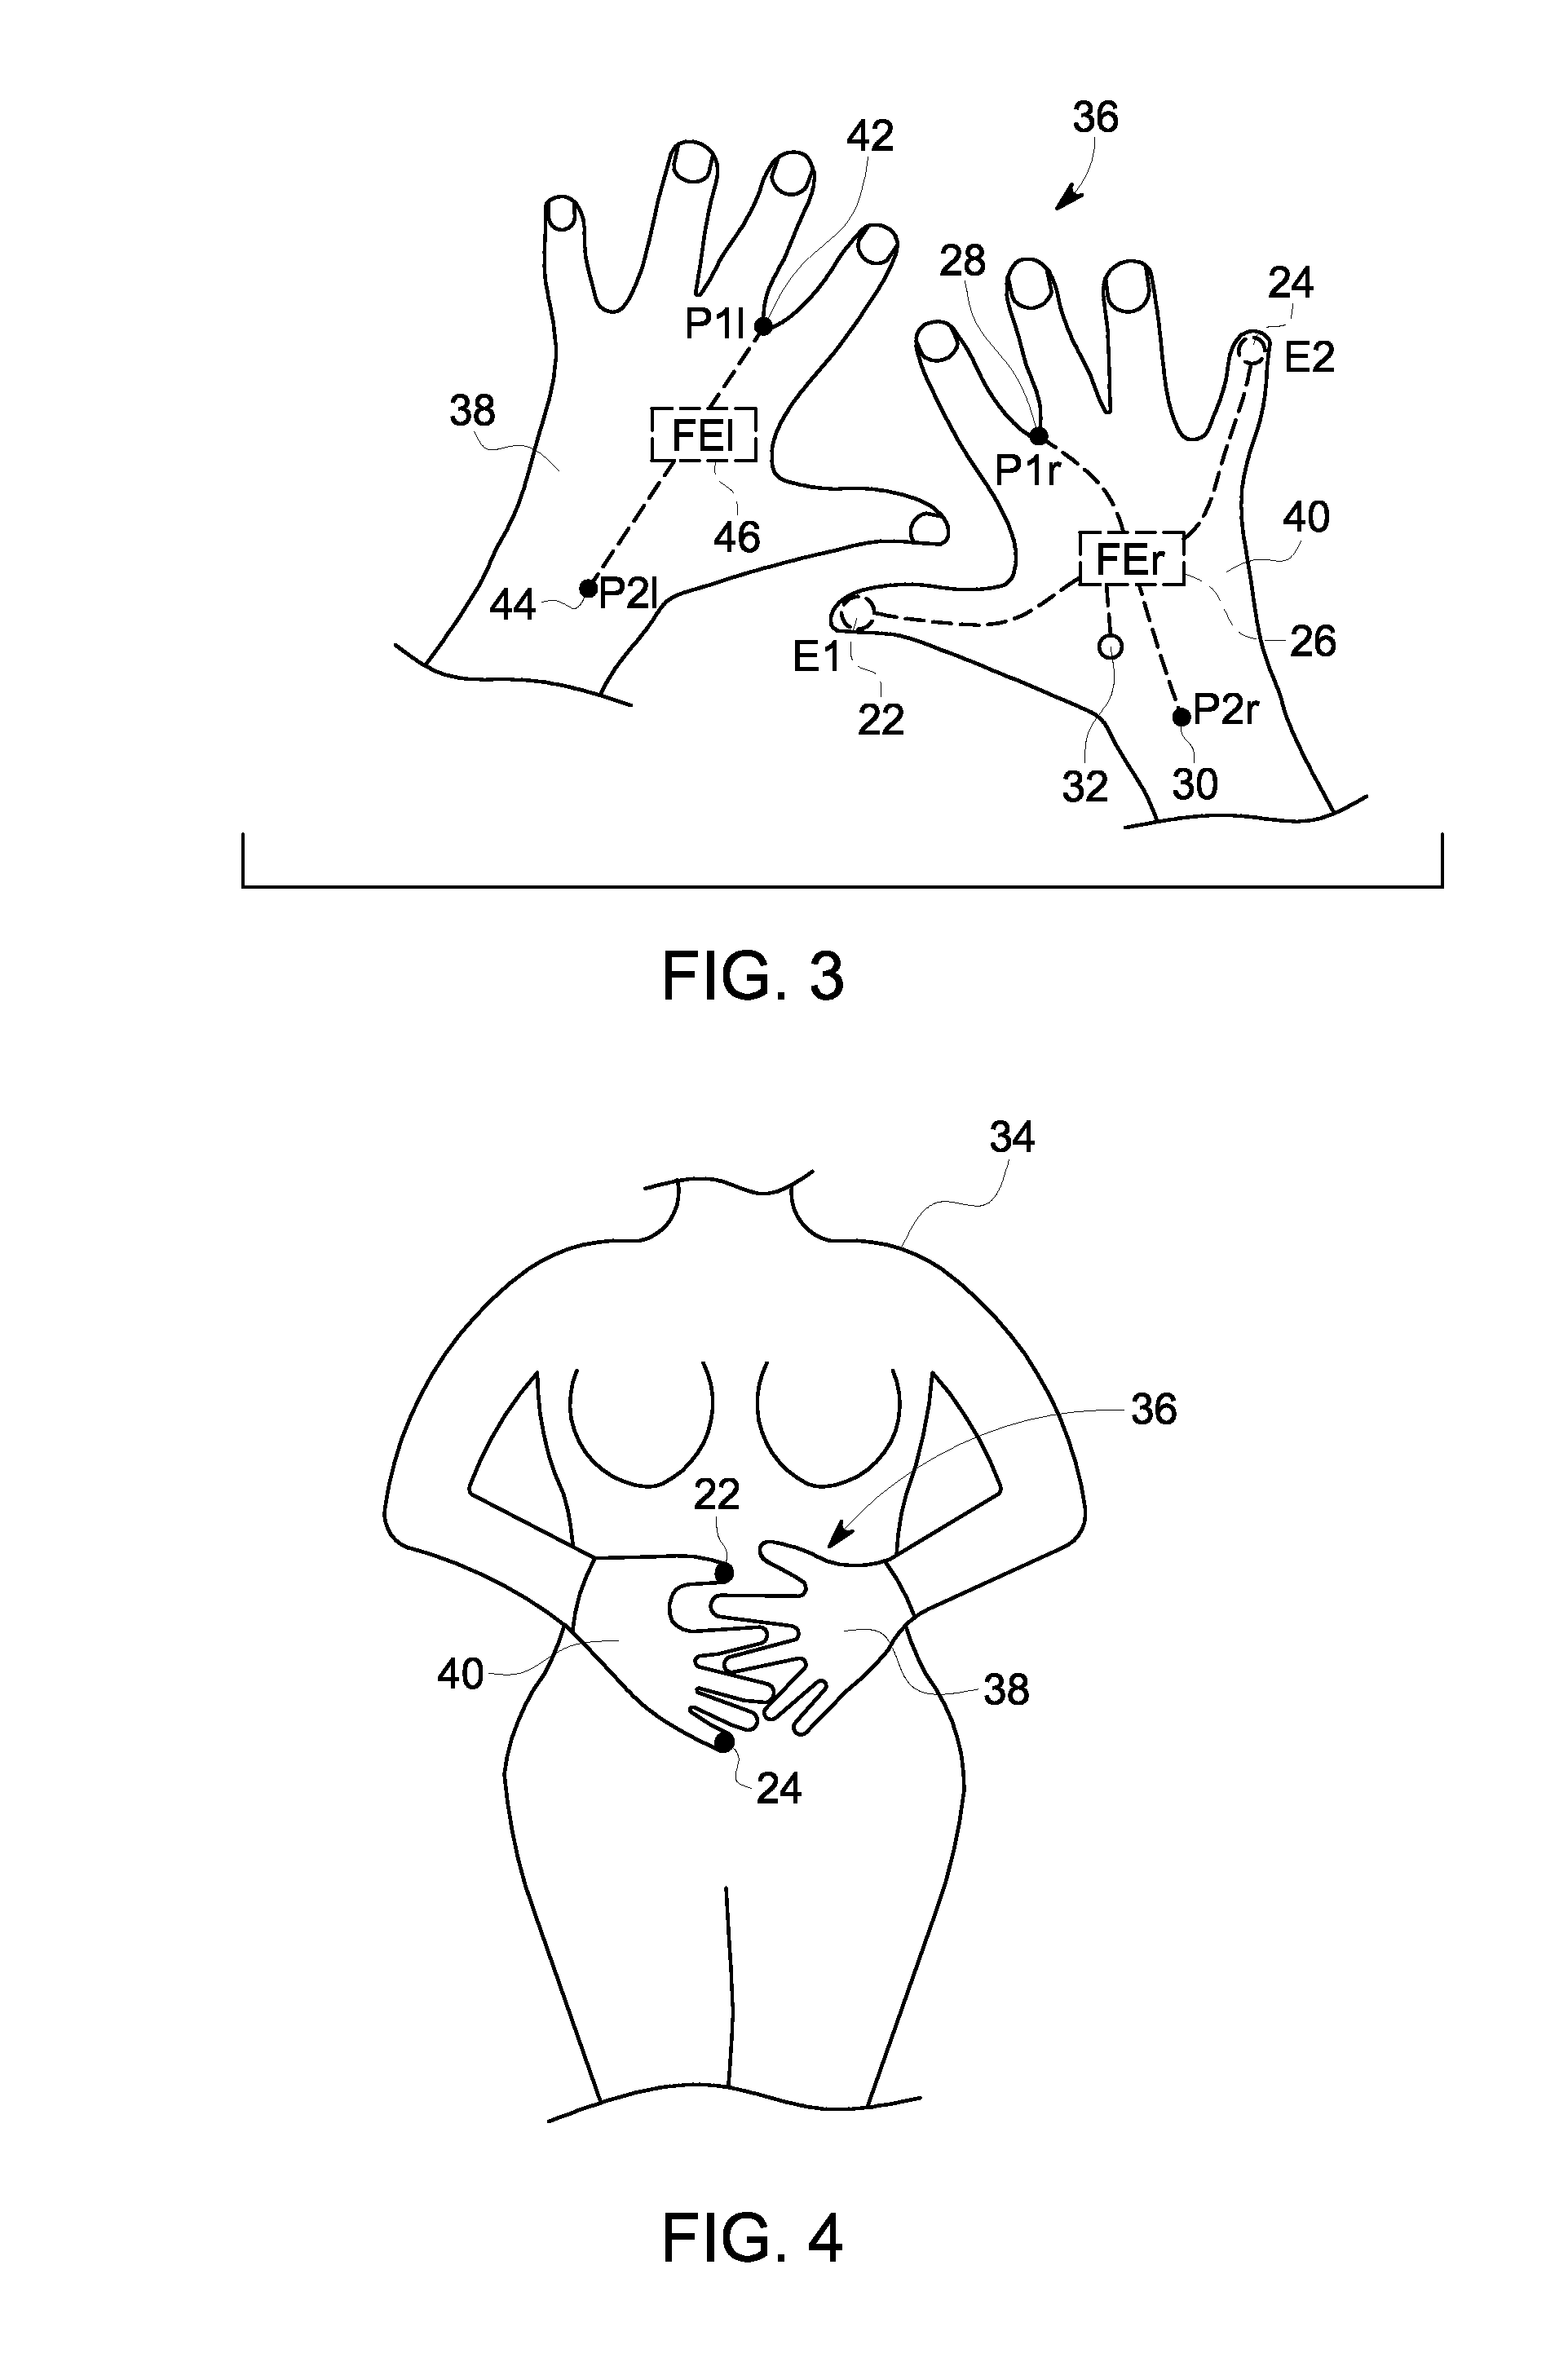 Fetal Monitoring Device and Method